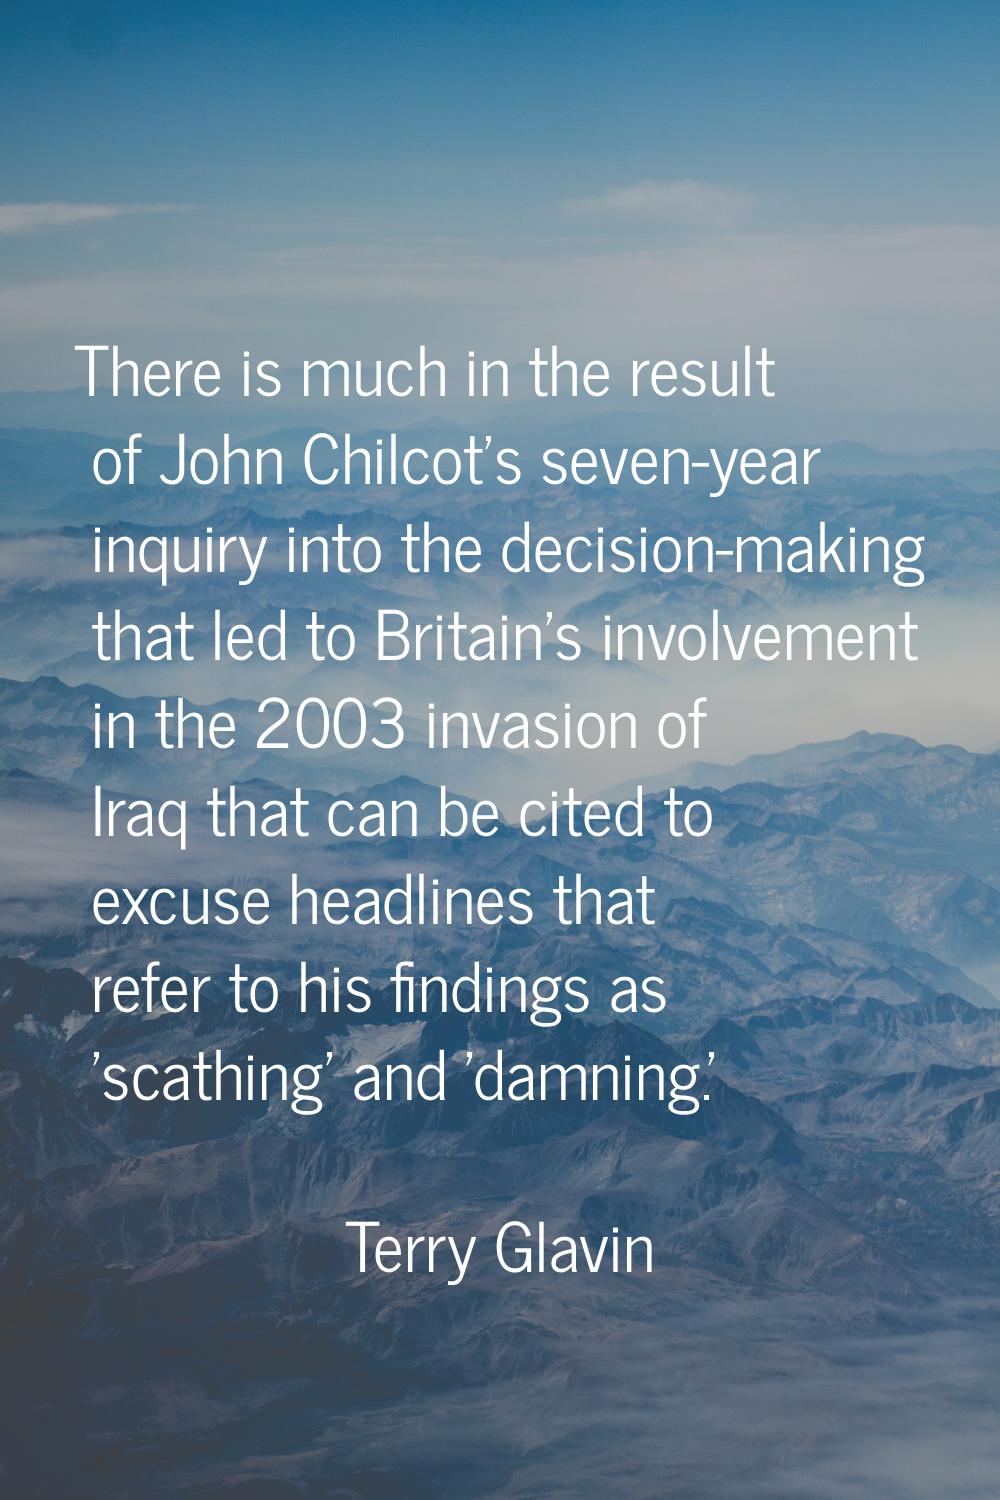 There is much in the result of John Chilcot's seven-year inquiry into the decision-making that led 